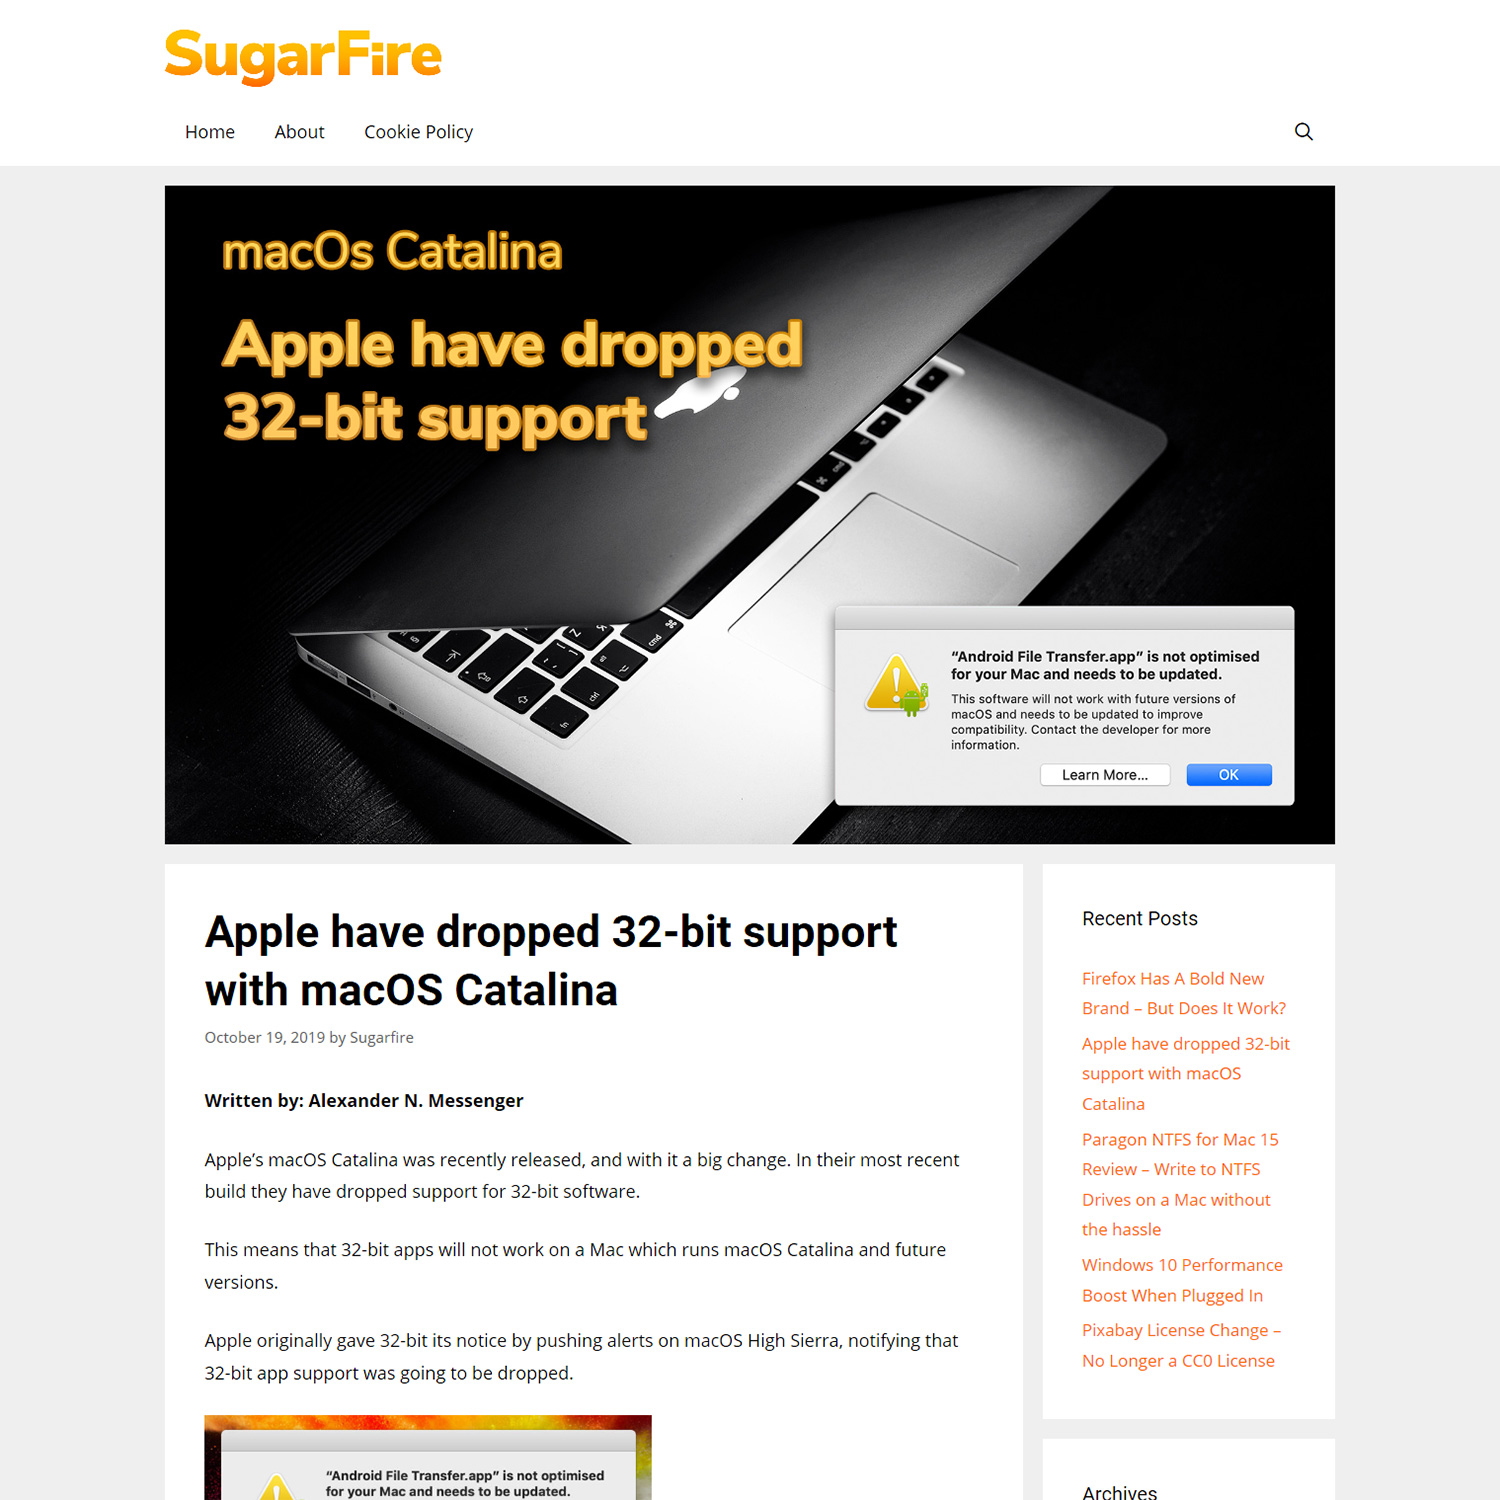 Image of Apple Have Dropped 32-bit Support with macOS Catalina article on the SugarFire.net website